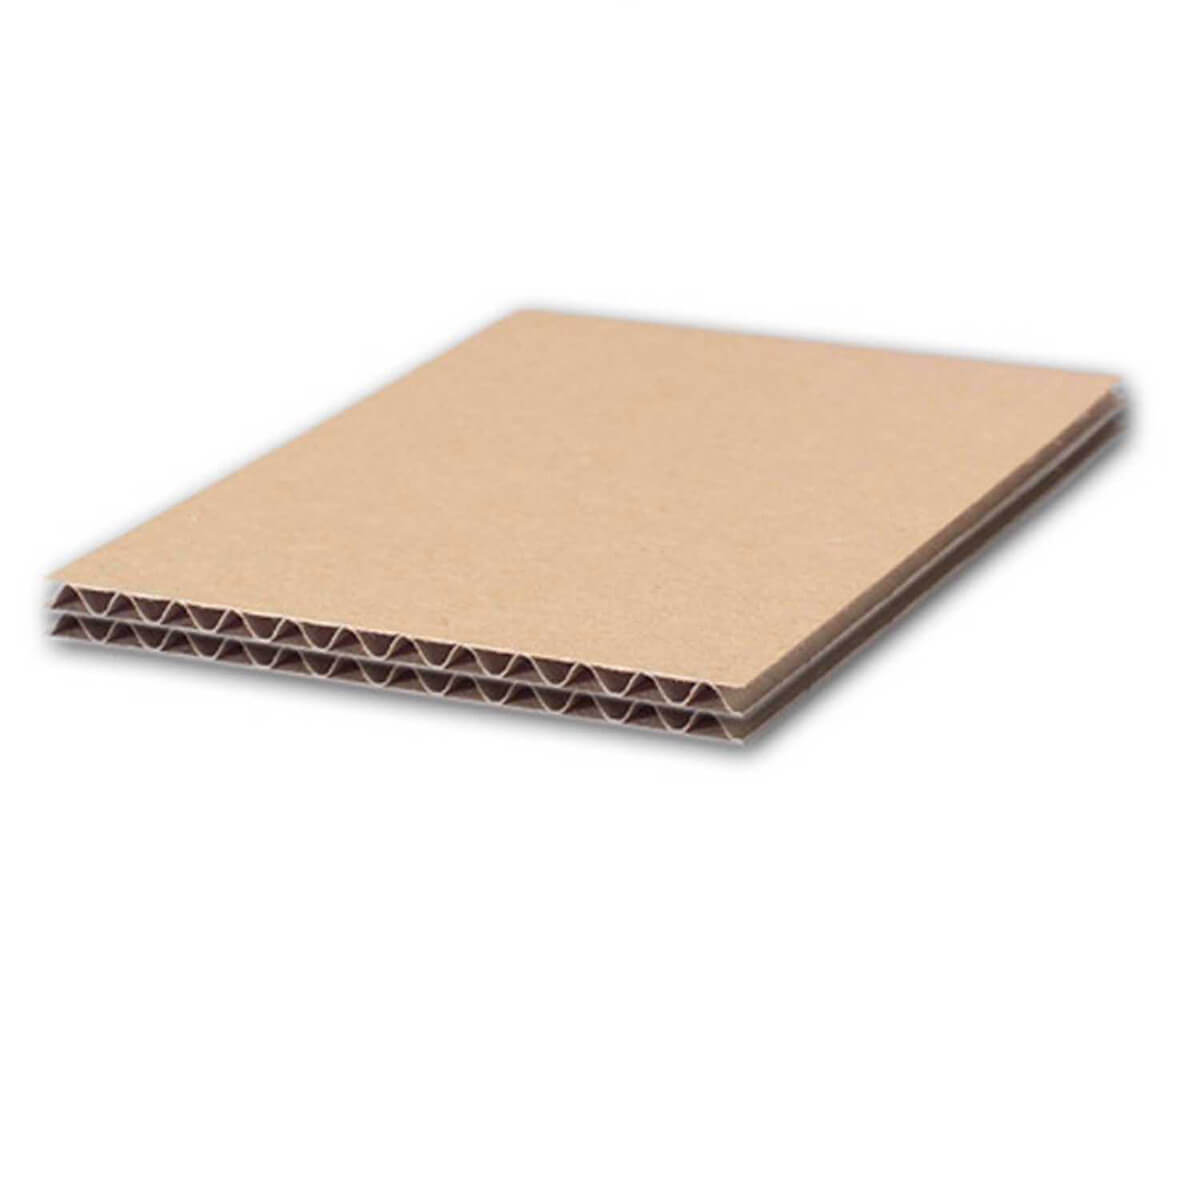 Corrugated board blanks double wall, 760 x 1160 mm